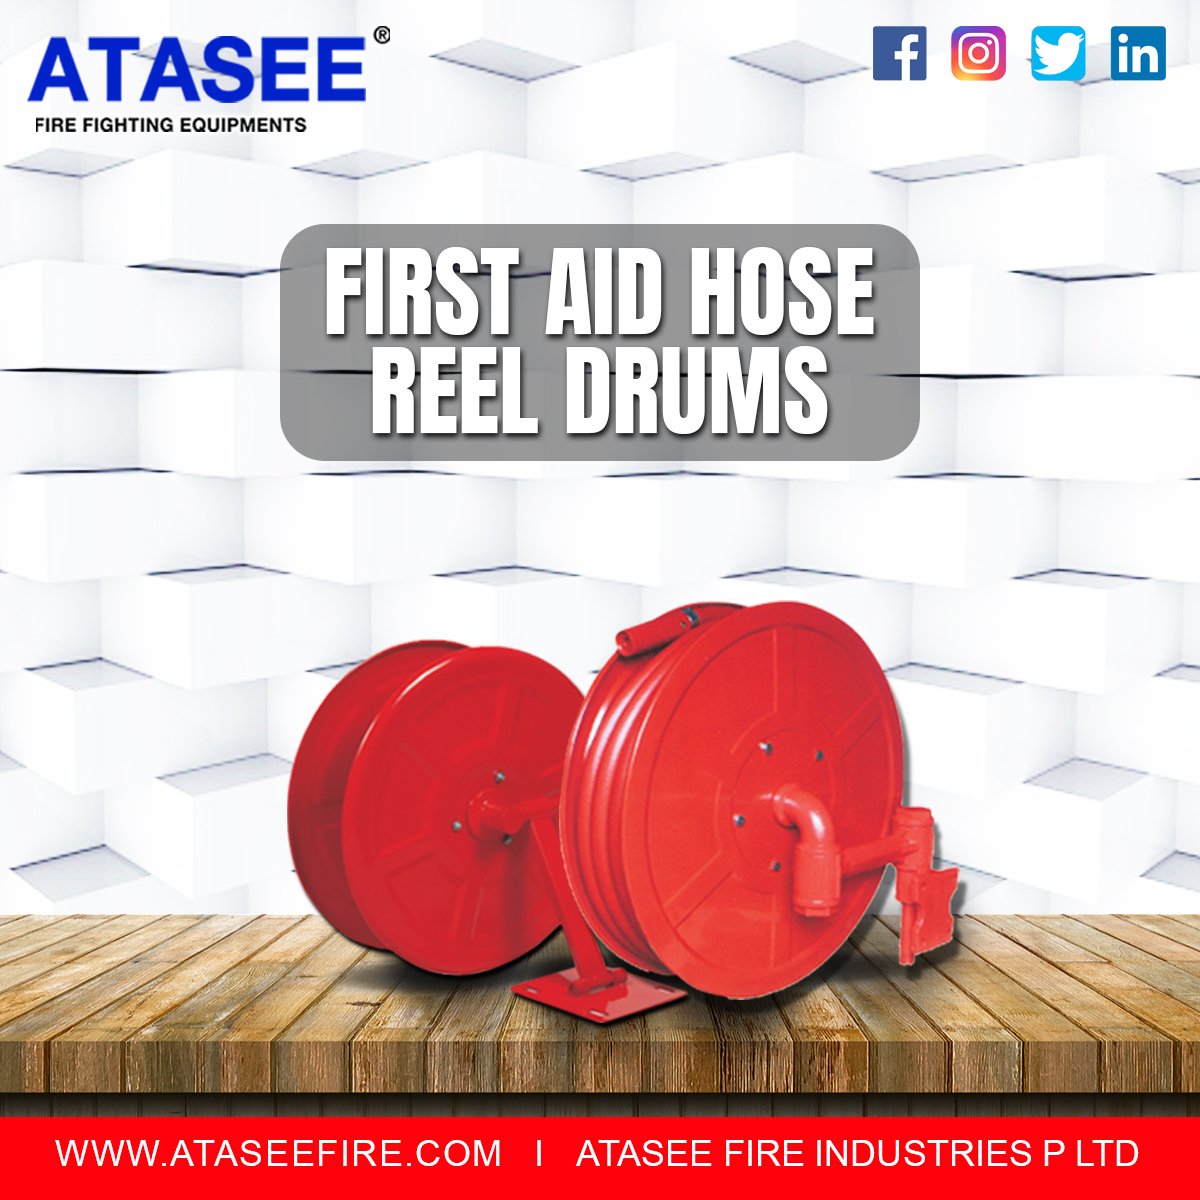 It is a cylindrical spindle, which is widely used used for storing hoses. It can be customized as per the diameter and hoses length that to be carried.

#FireSafety #FireSafetyTips #FireSafetyTip #Firesafetycourse #firesafetyawareness #firesafetyequipment #fireprotection